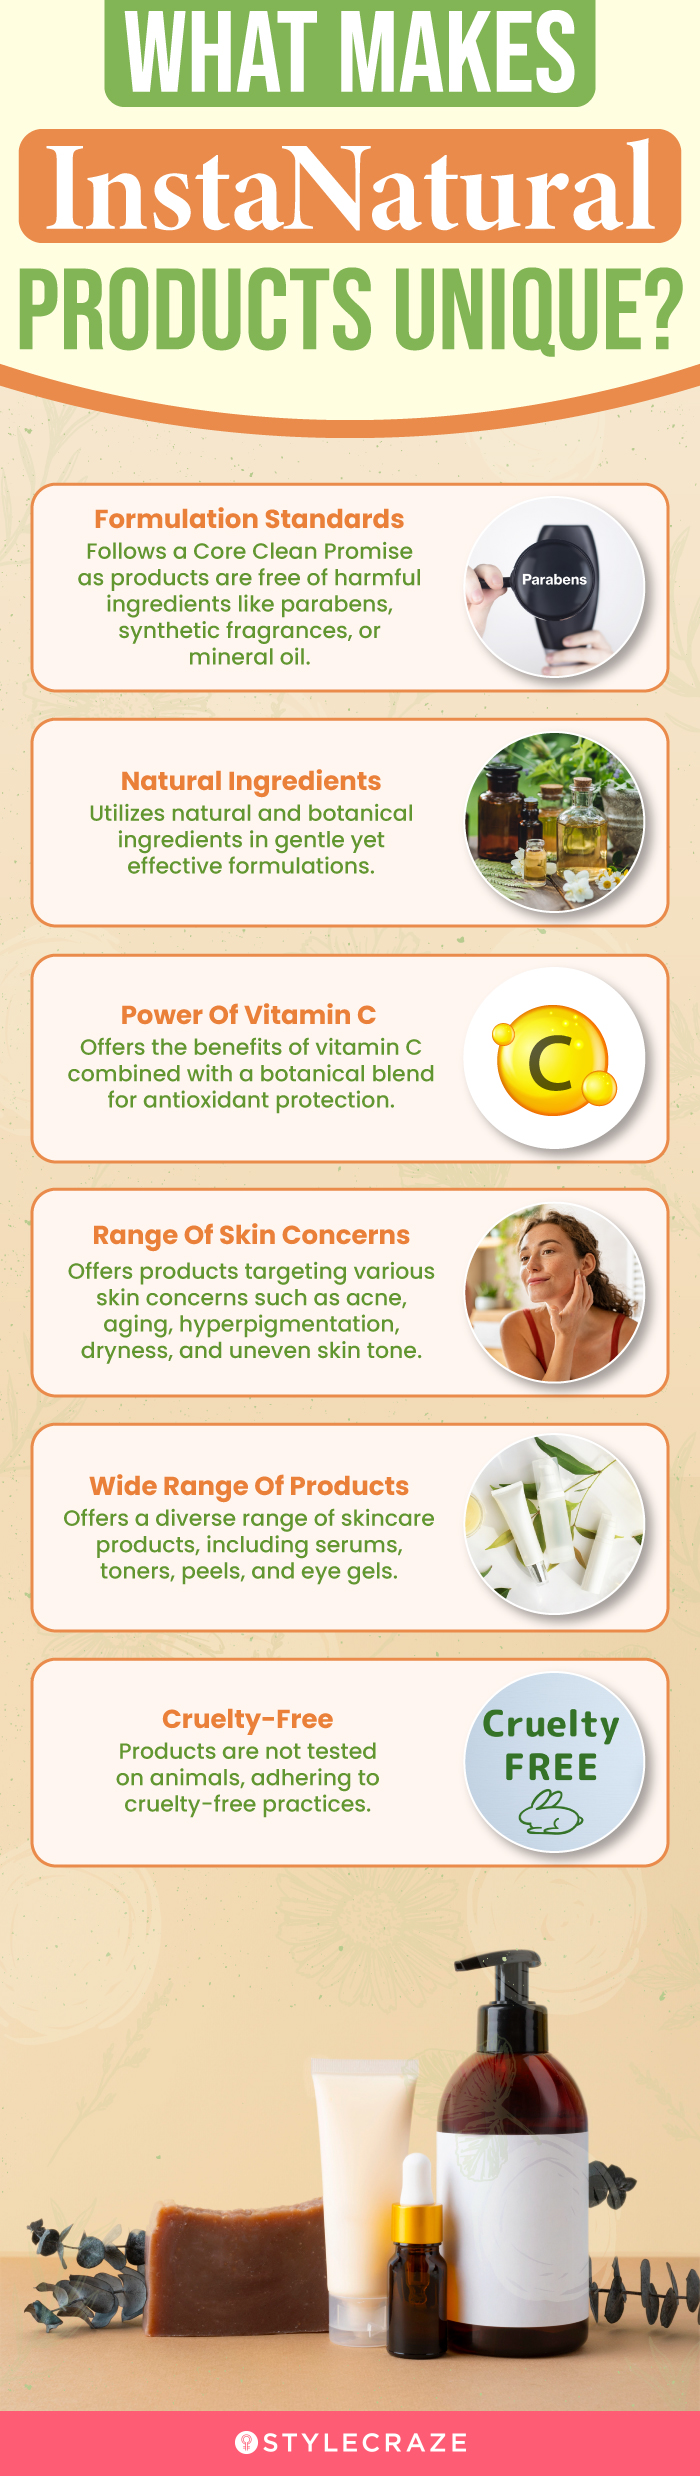 What Makes InstaNatural Products Unique? (infographic)